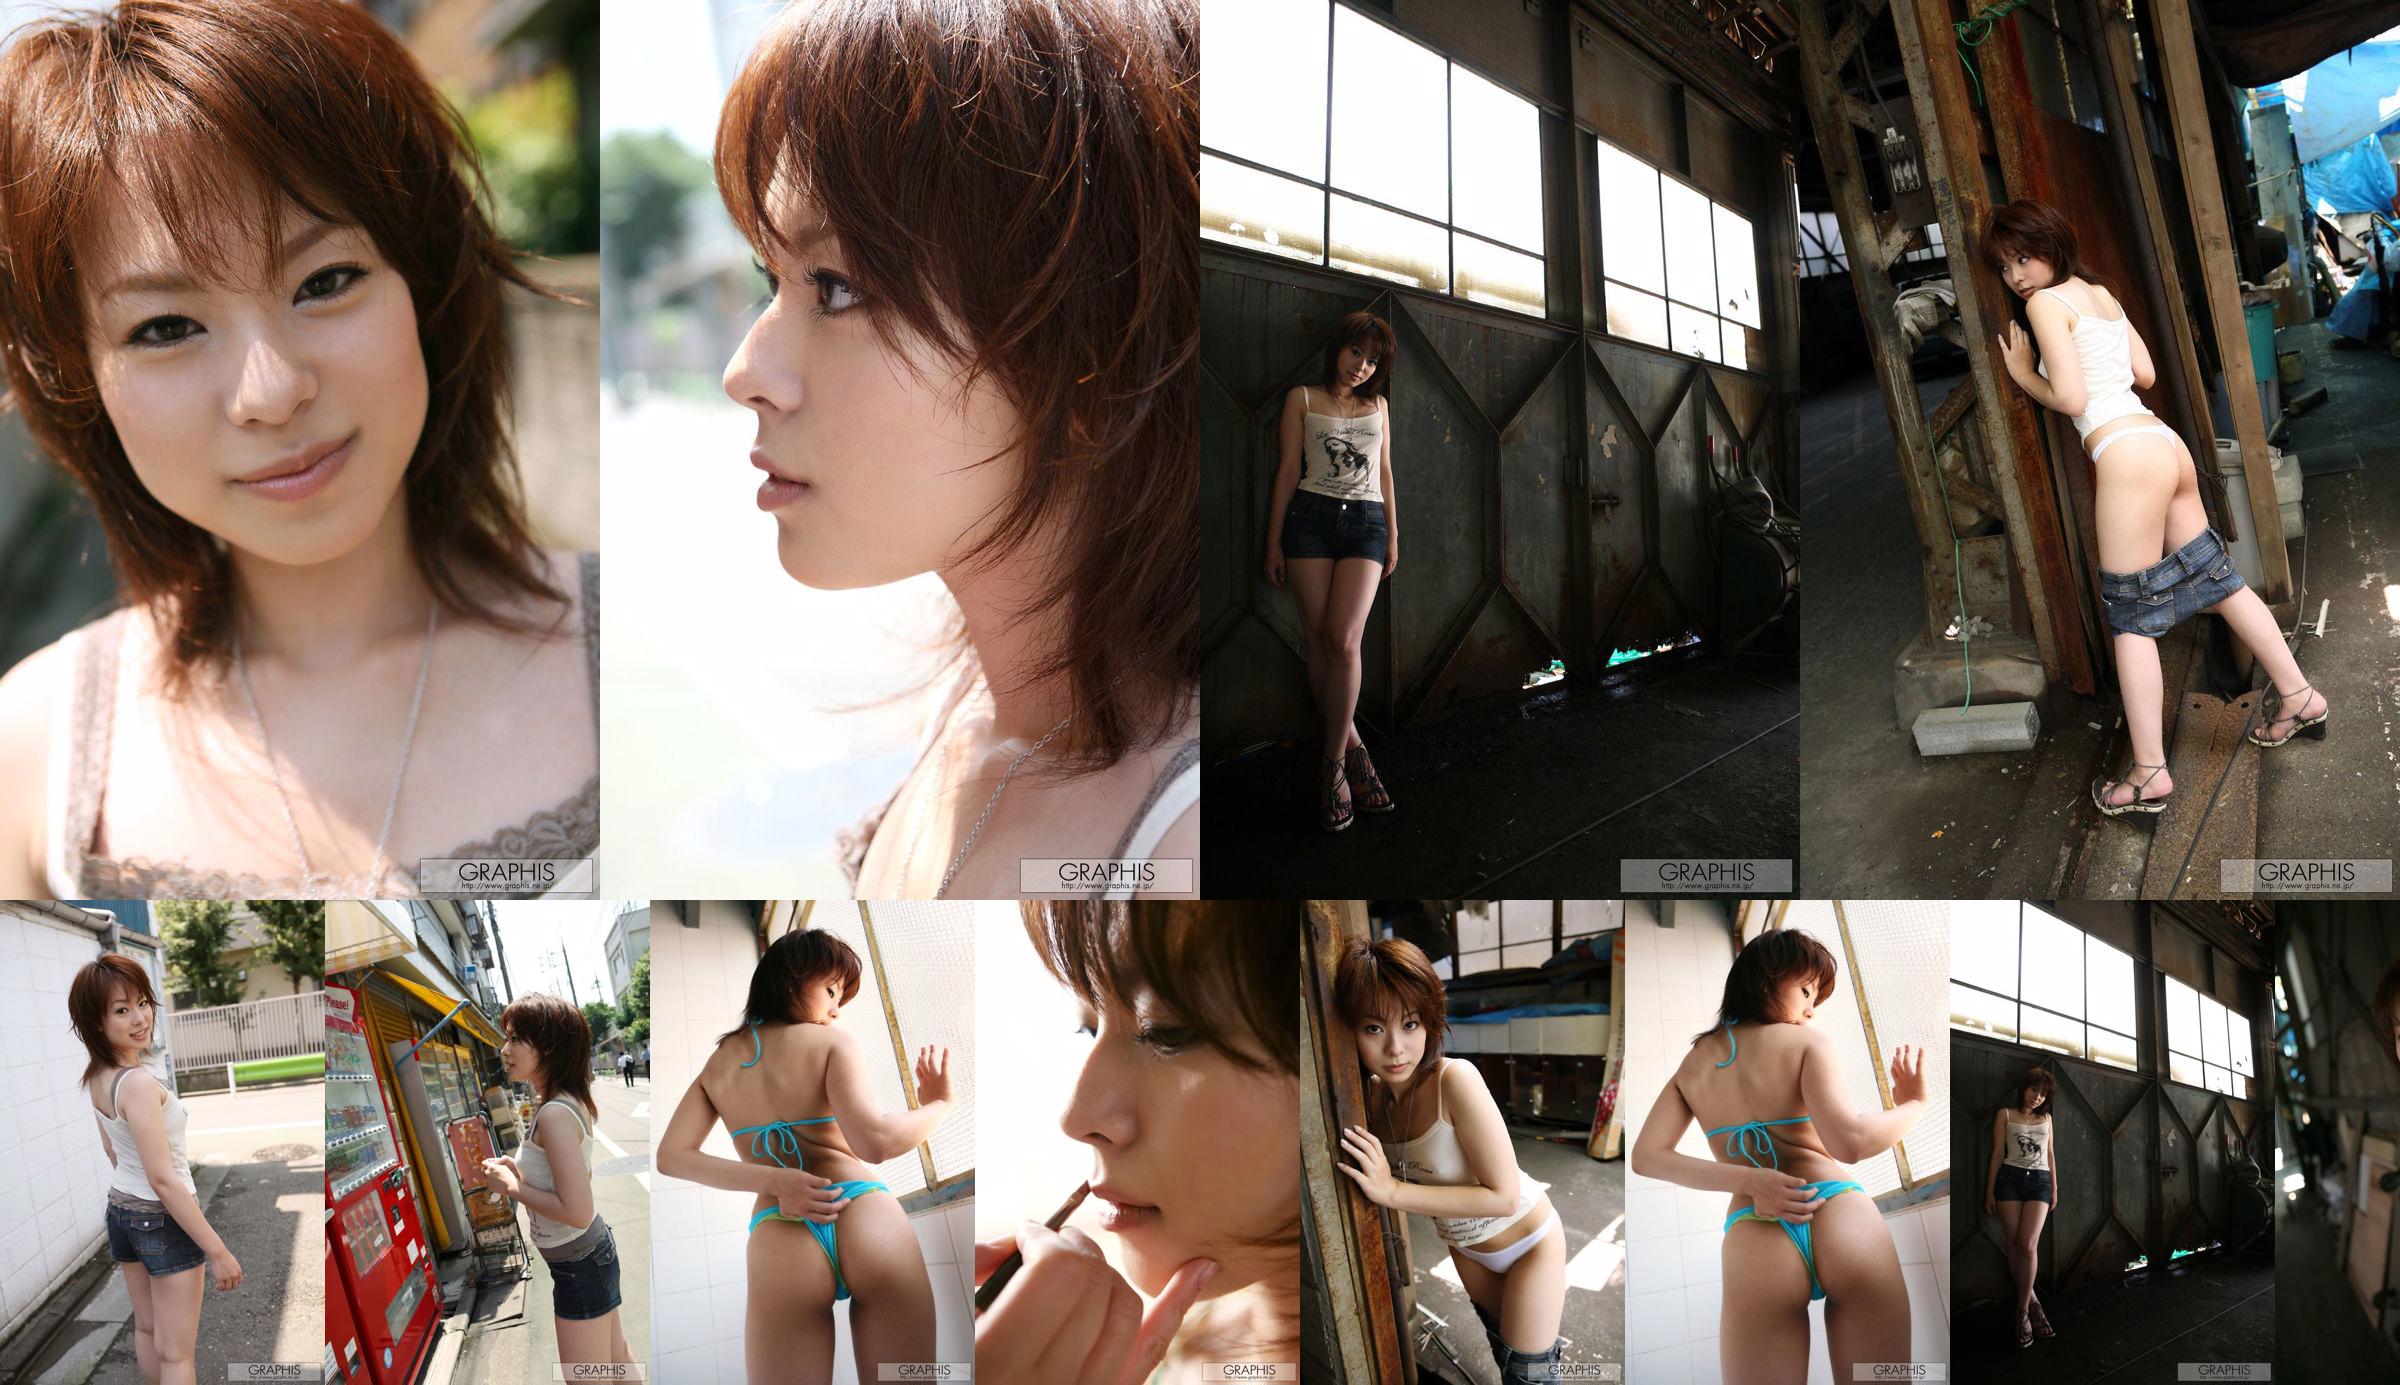 Mina Manabe Mina Manabe [Graphis] First Gravure First Take Off Daughter No.502b57 หน้า 1